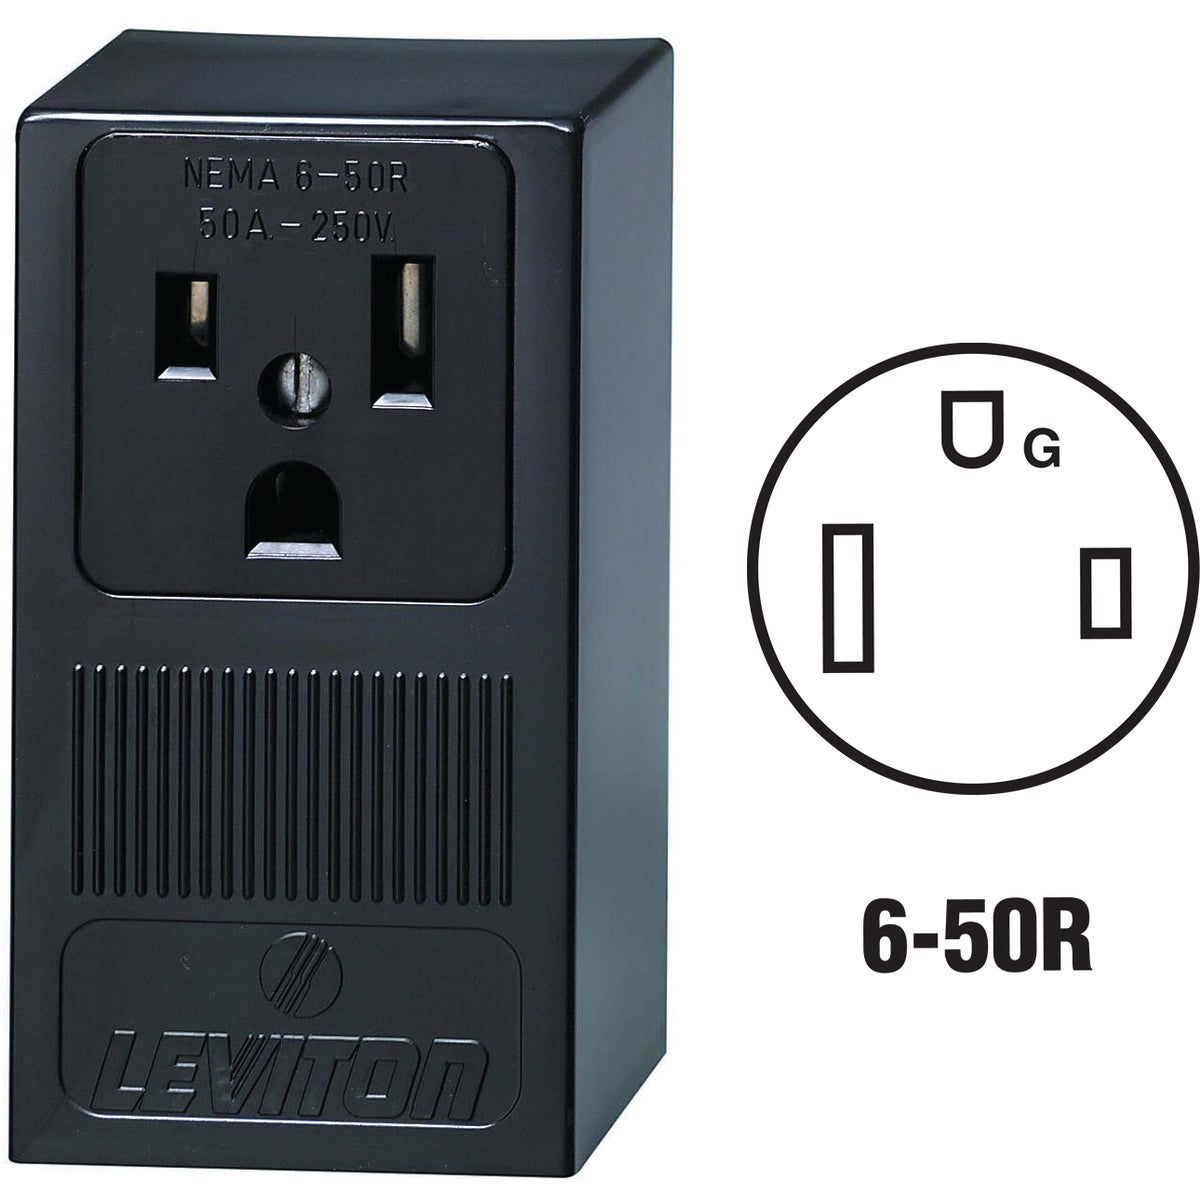 Item 532203, Power grounding outlet ideal for use with welders. 2-pole, 3-wire.